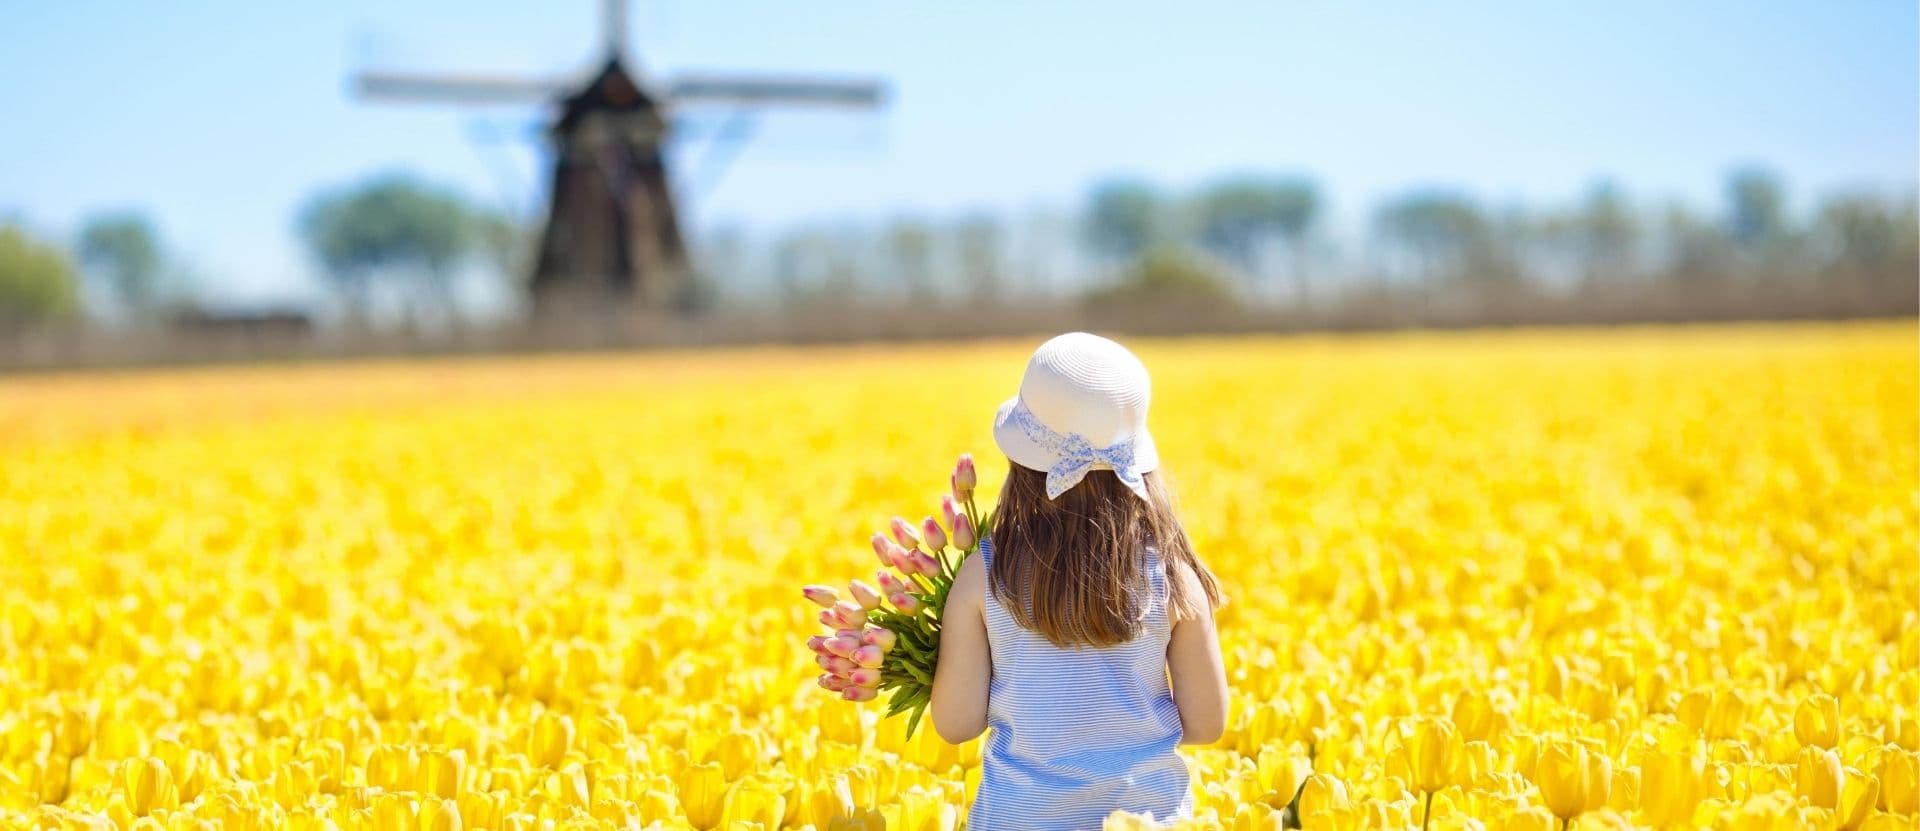 Girl in a tulip field in front of a windmill, the Netherlands, Holland